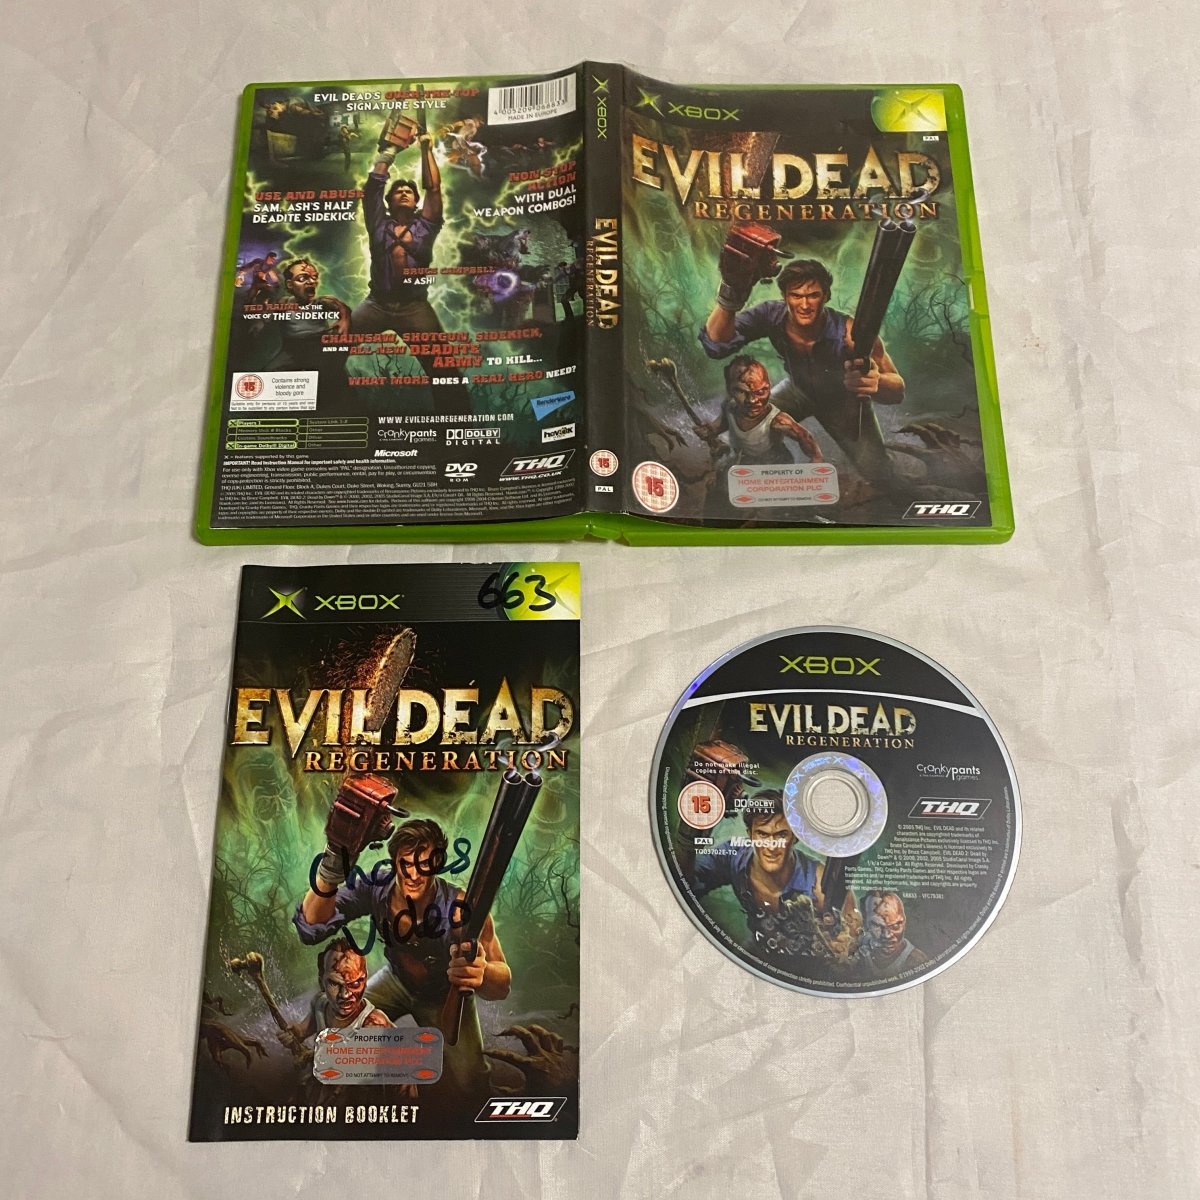 Evil Dead Regeneration PC game Complete in Retail box w/ Disc and Manual